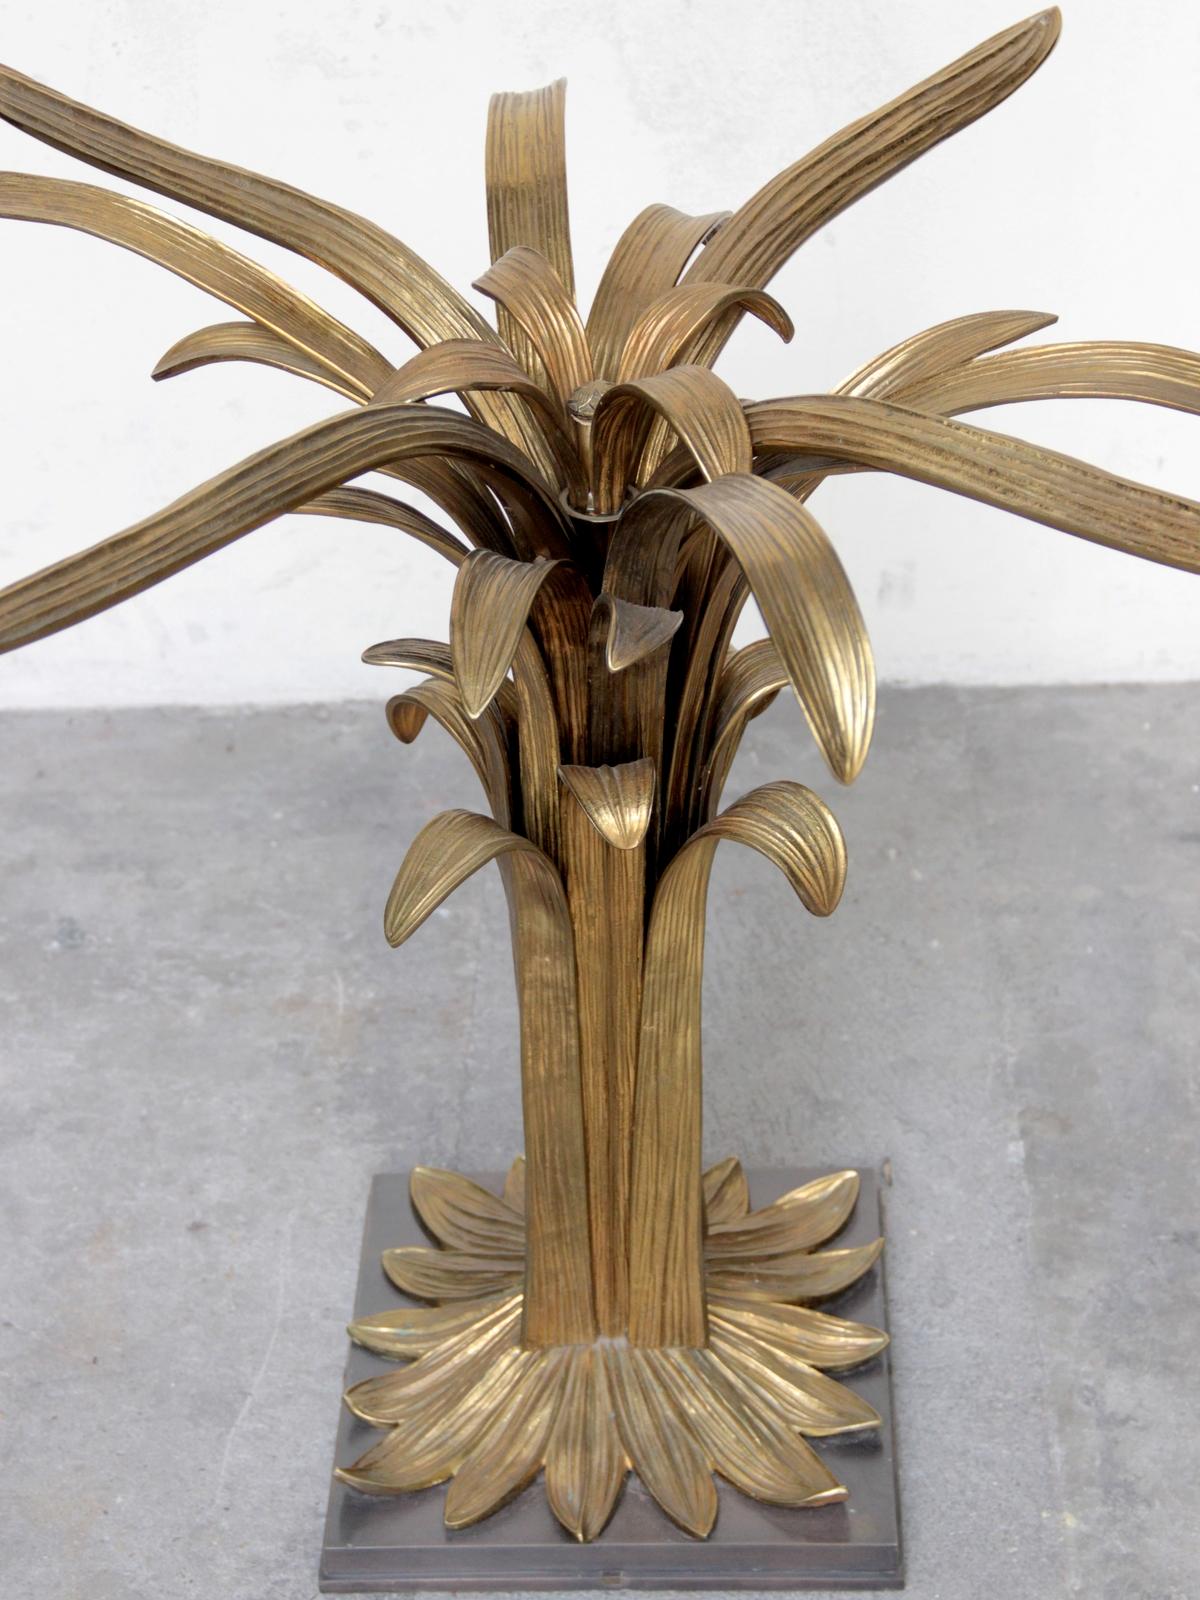 Rare table designed by Chrystiane Charles and made by Maison Charles, circa 1970.
It's composed of two bases, each representing a bouquet of water leaves in gilded and patinated solid bronze, fixed on a brass base with blackened nickel finish.